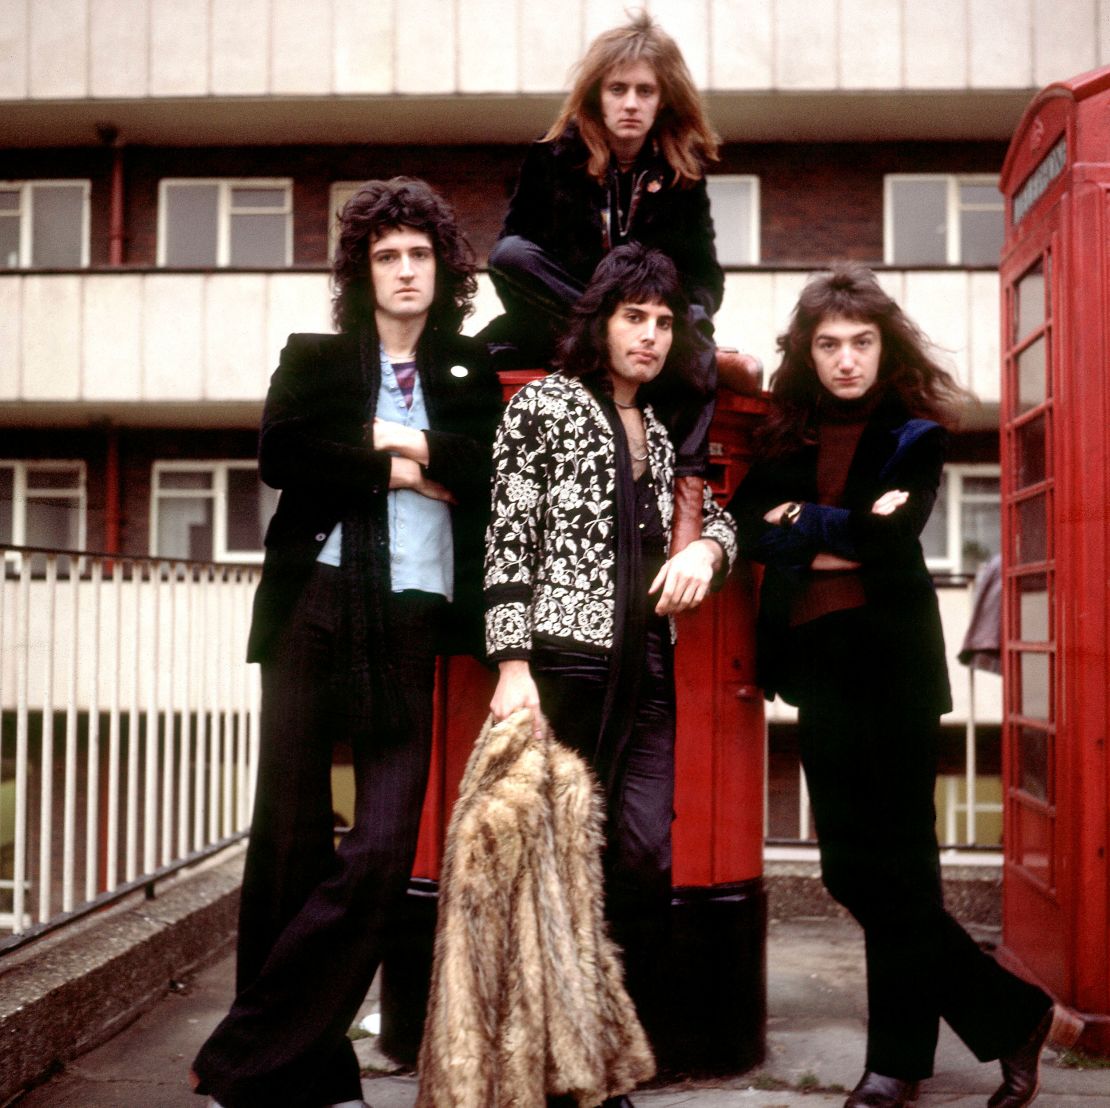 Freddie Mercury (center, front) poses with Queen bandmates Brian May, Roger Taylor and John Deacon, circa 1973.